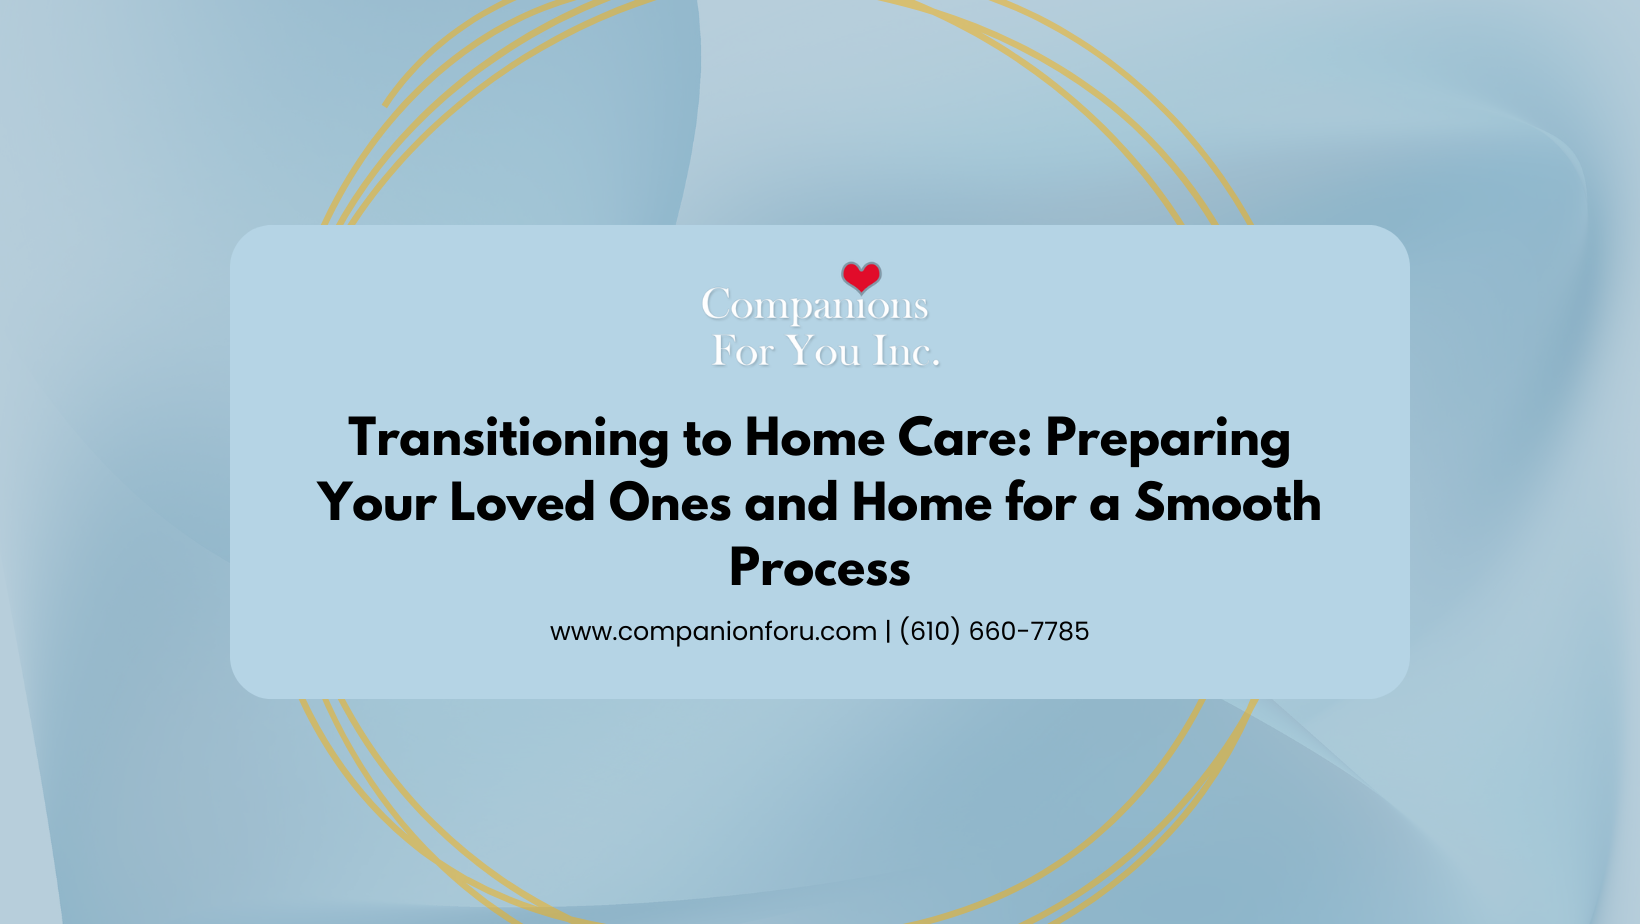 Transitioning to Home Care: Preparing Your Loved Ones and Home for a Smooth Process